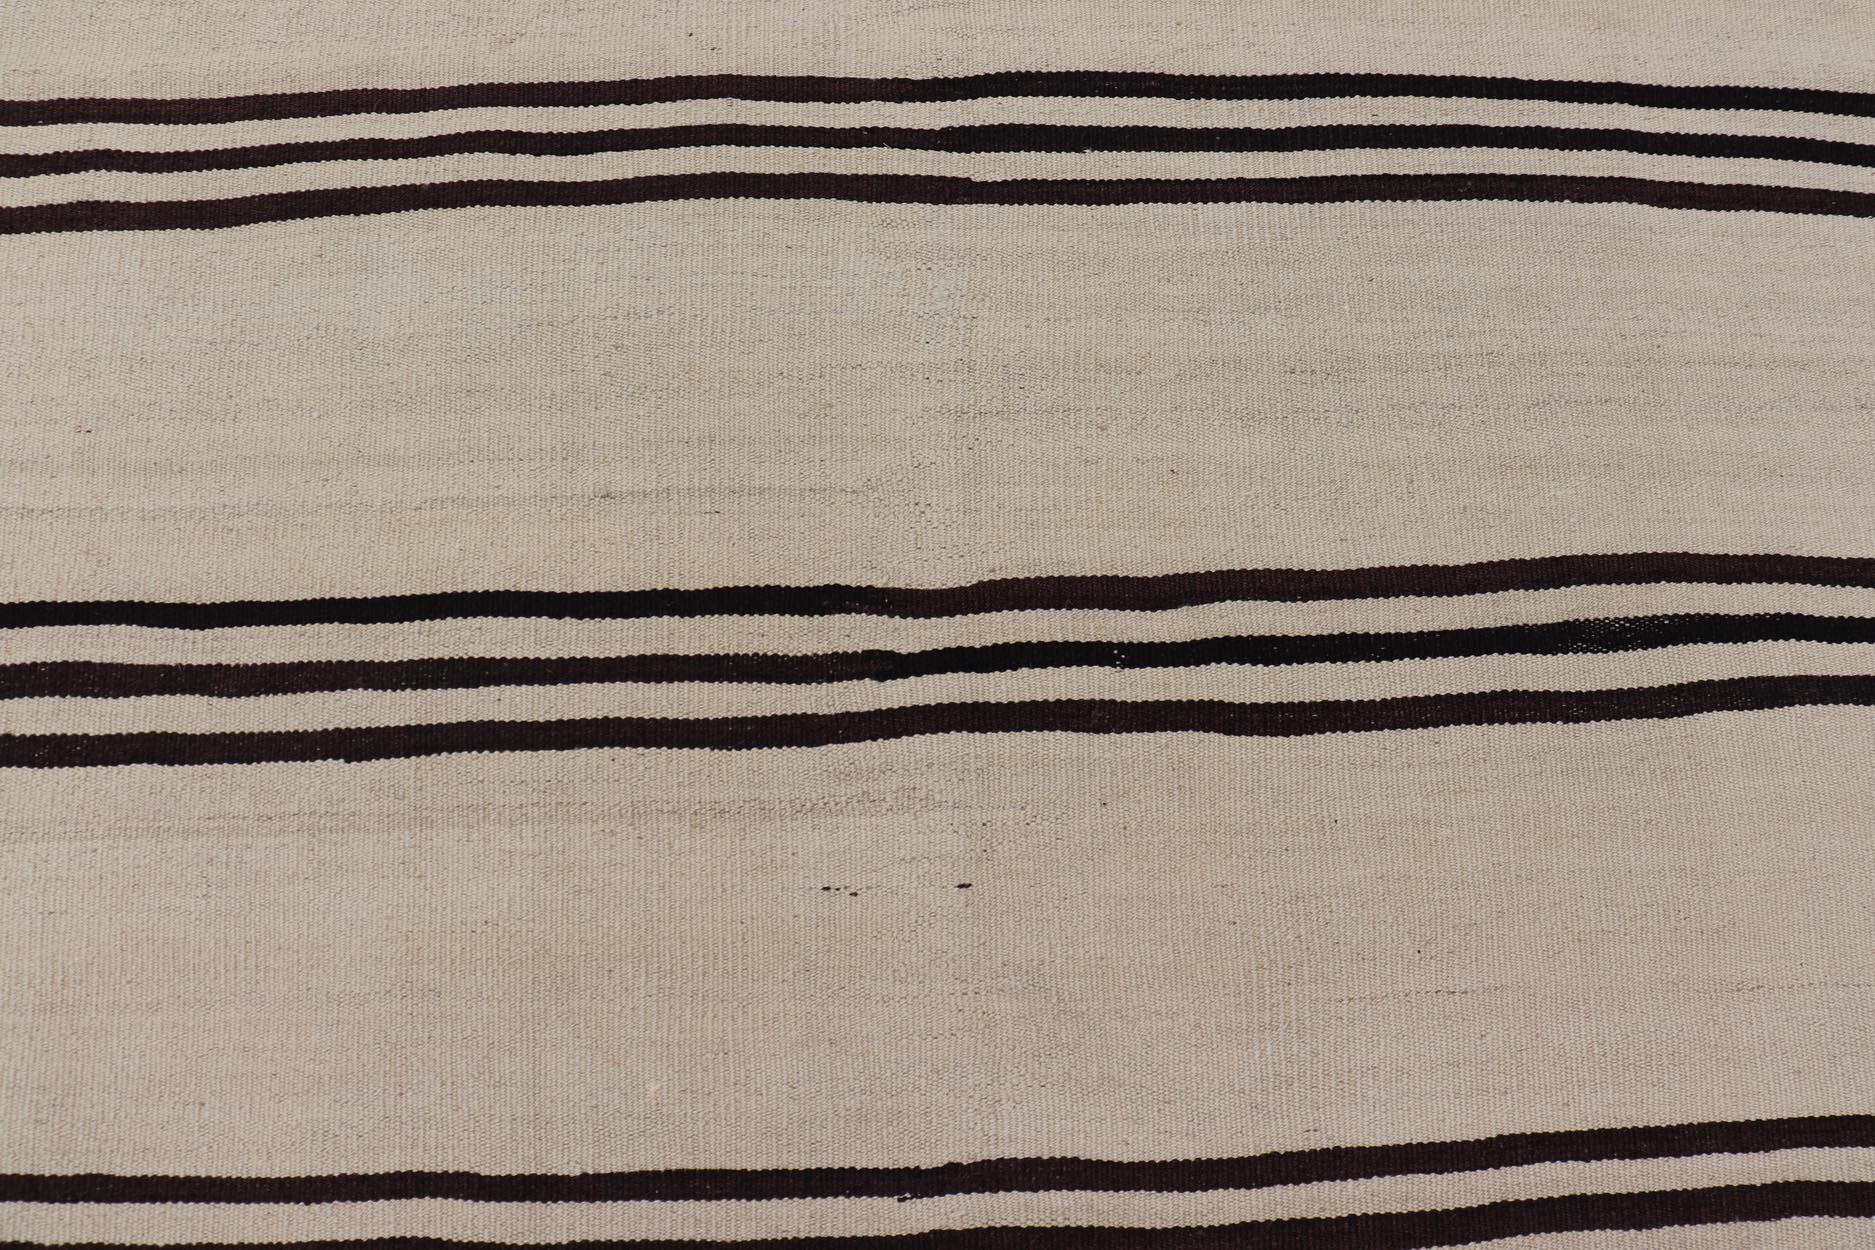 Vintage Flat Weave Turkish Kilim with Stripes in Ivory and Brown. Keivan Woven Arts / rug EN-13467, country of origin / type: Turkey / Kilim, circa Mid-20th Century.
Measures: 4'5 x 6'5 
This vintage flat-woven Kilim features a Minimalist design